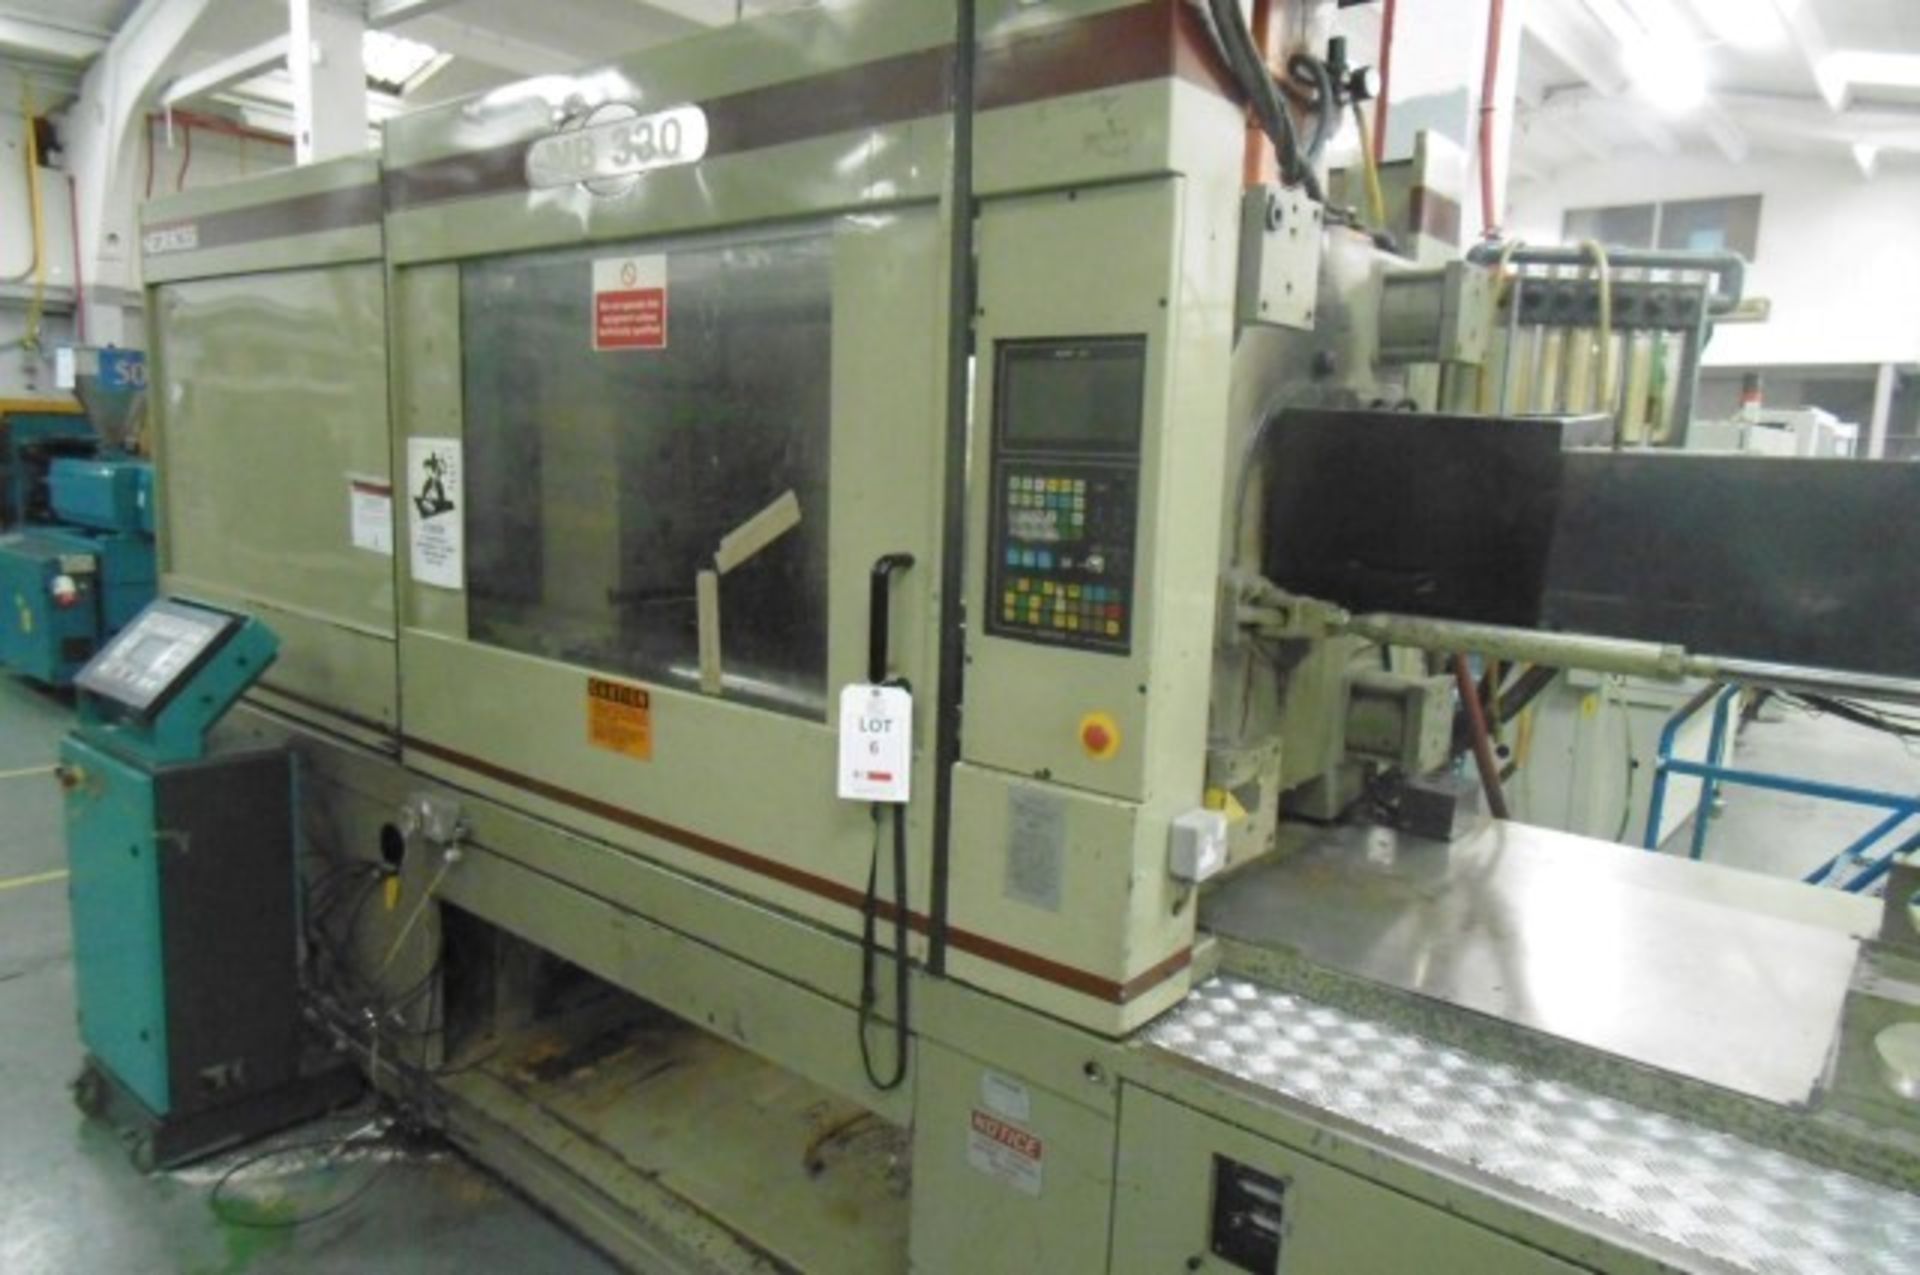 Negri Bossi NB330 horizontal injection moulding machine s/n. 54-197 Date of Manufacture 1994 with - Image 3 of 4